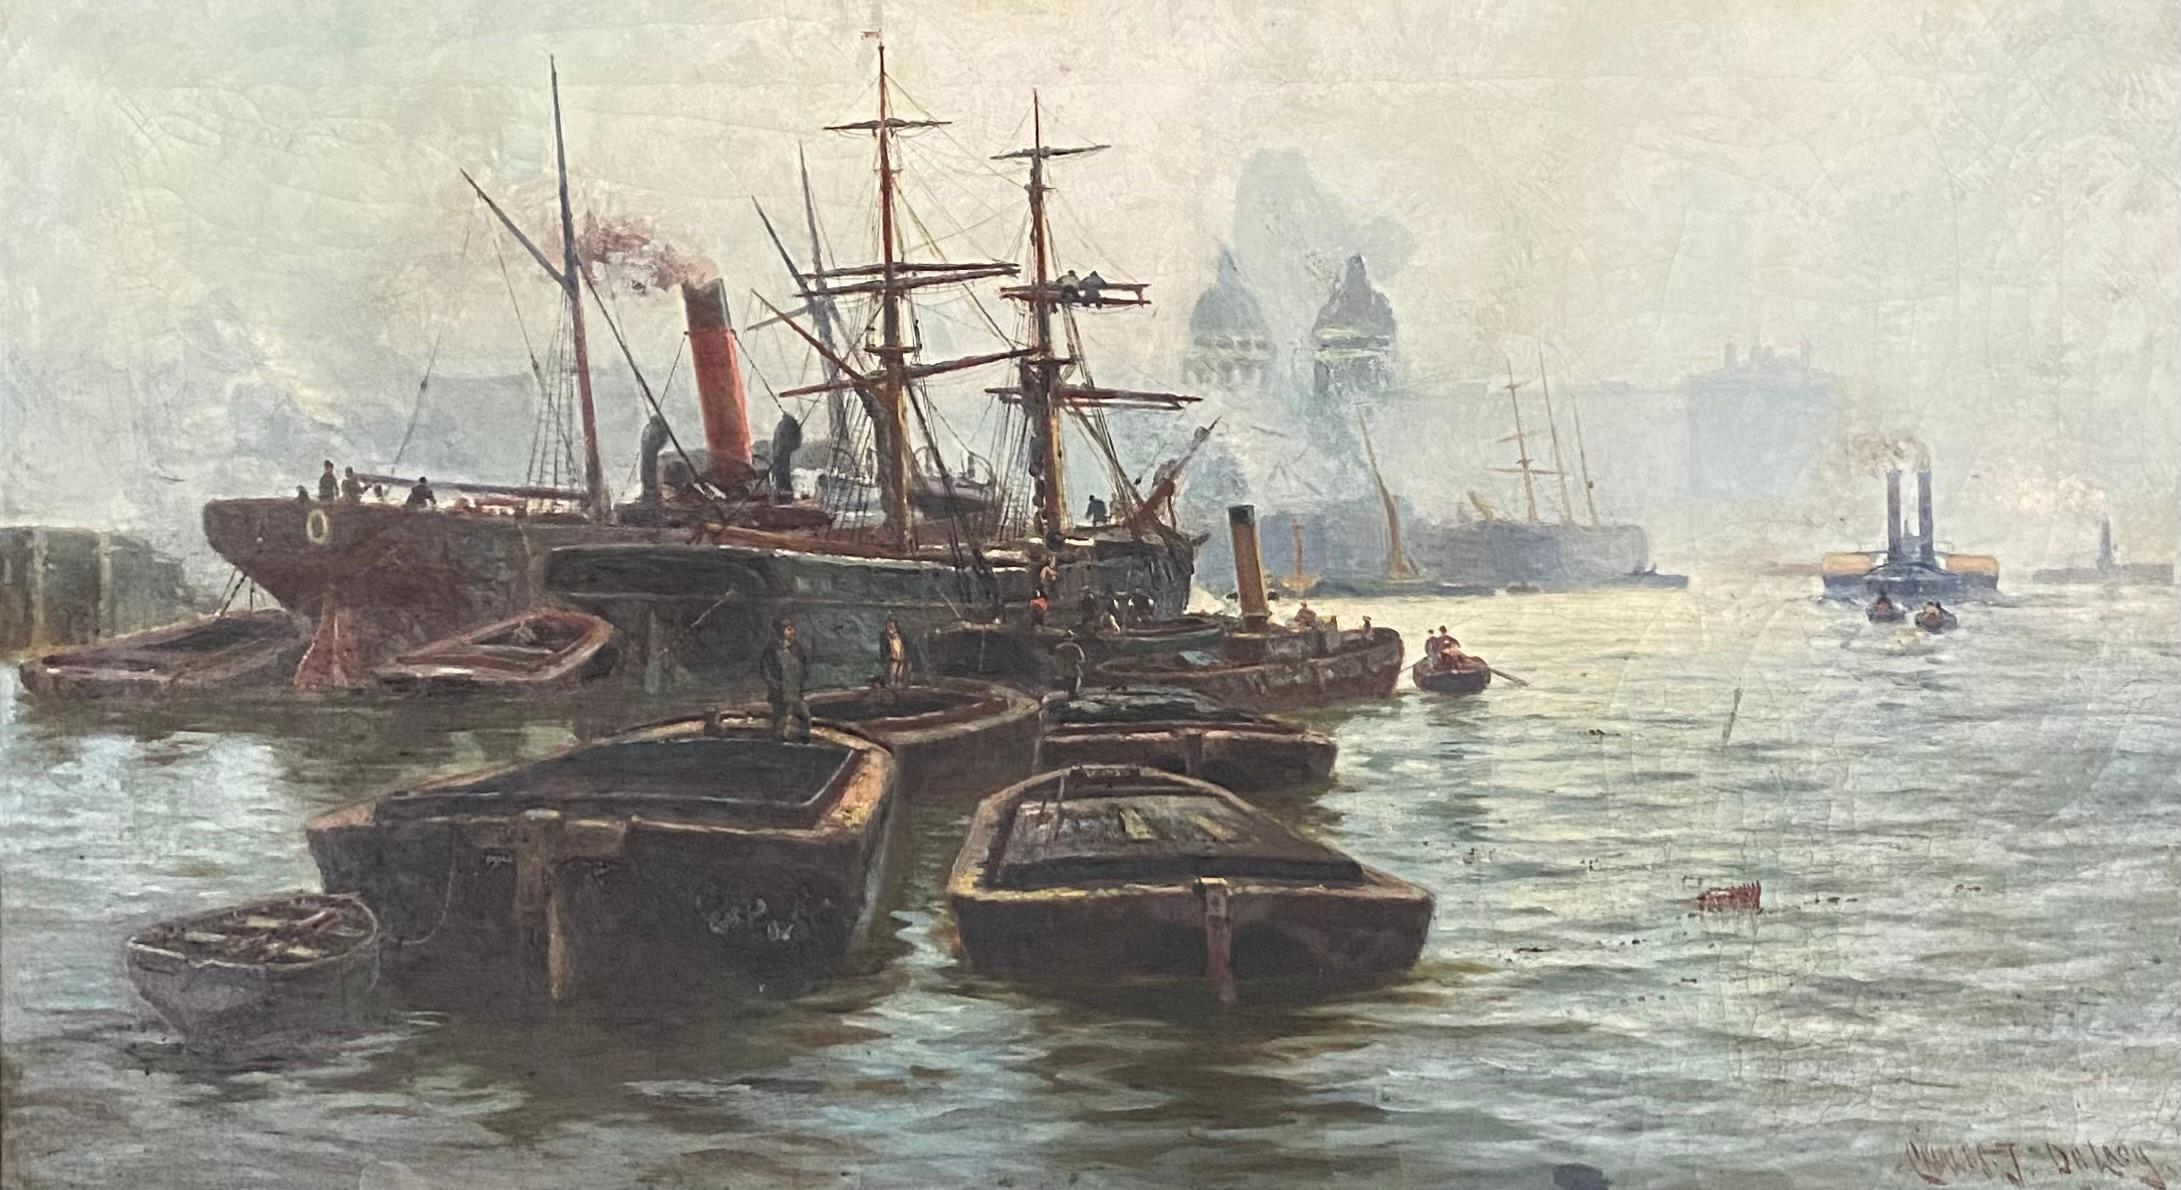 DE LACEY Charles James Figurative Painting - Ships in a harbour. Oil on canvas. Signed.